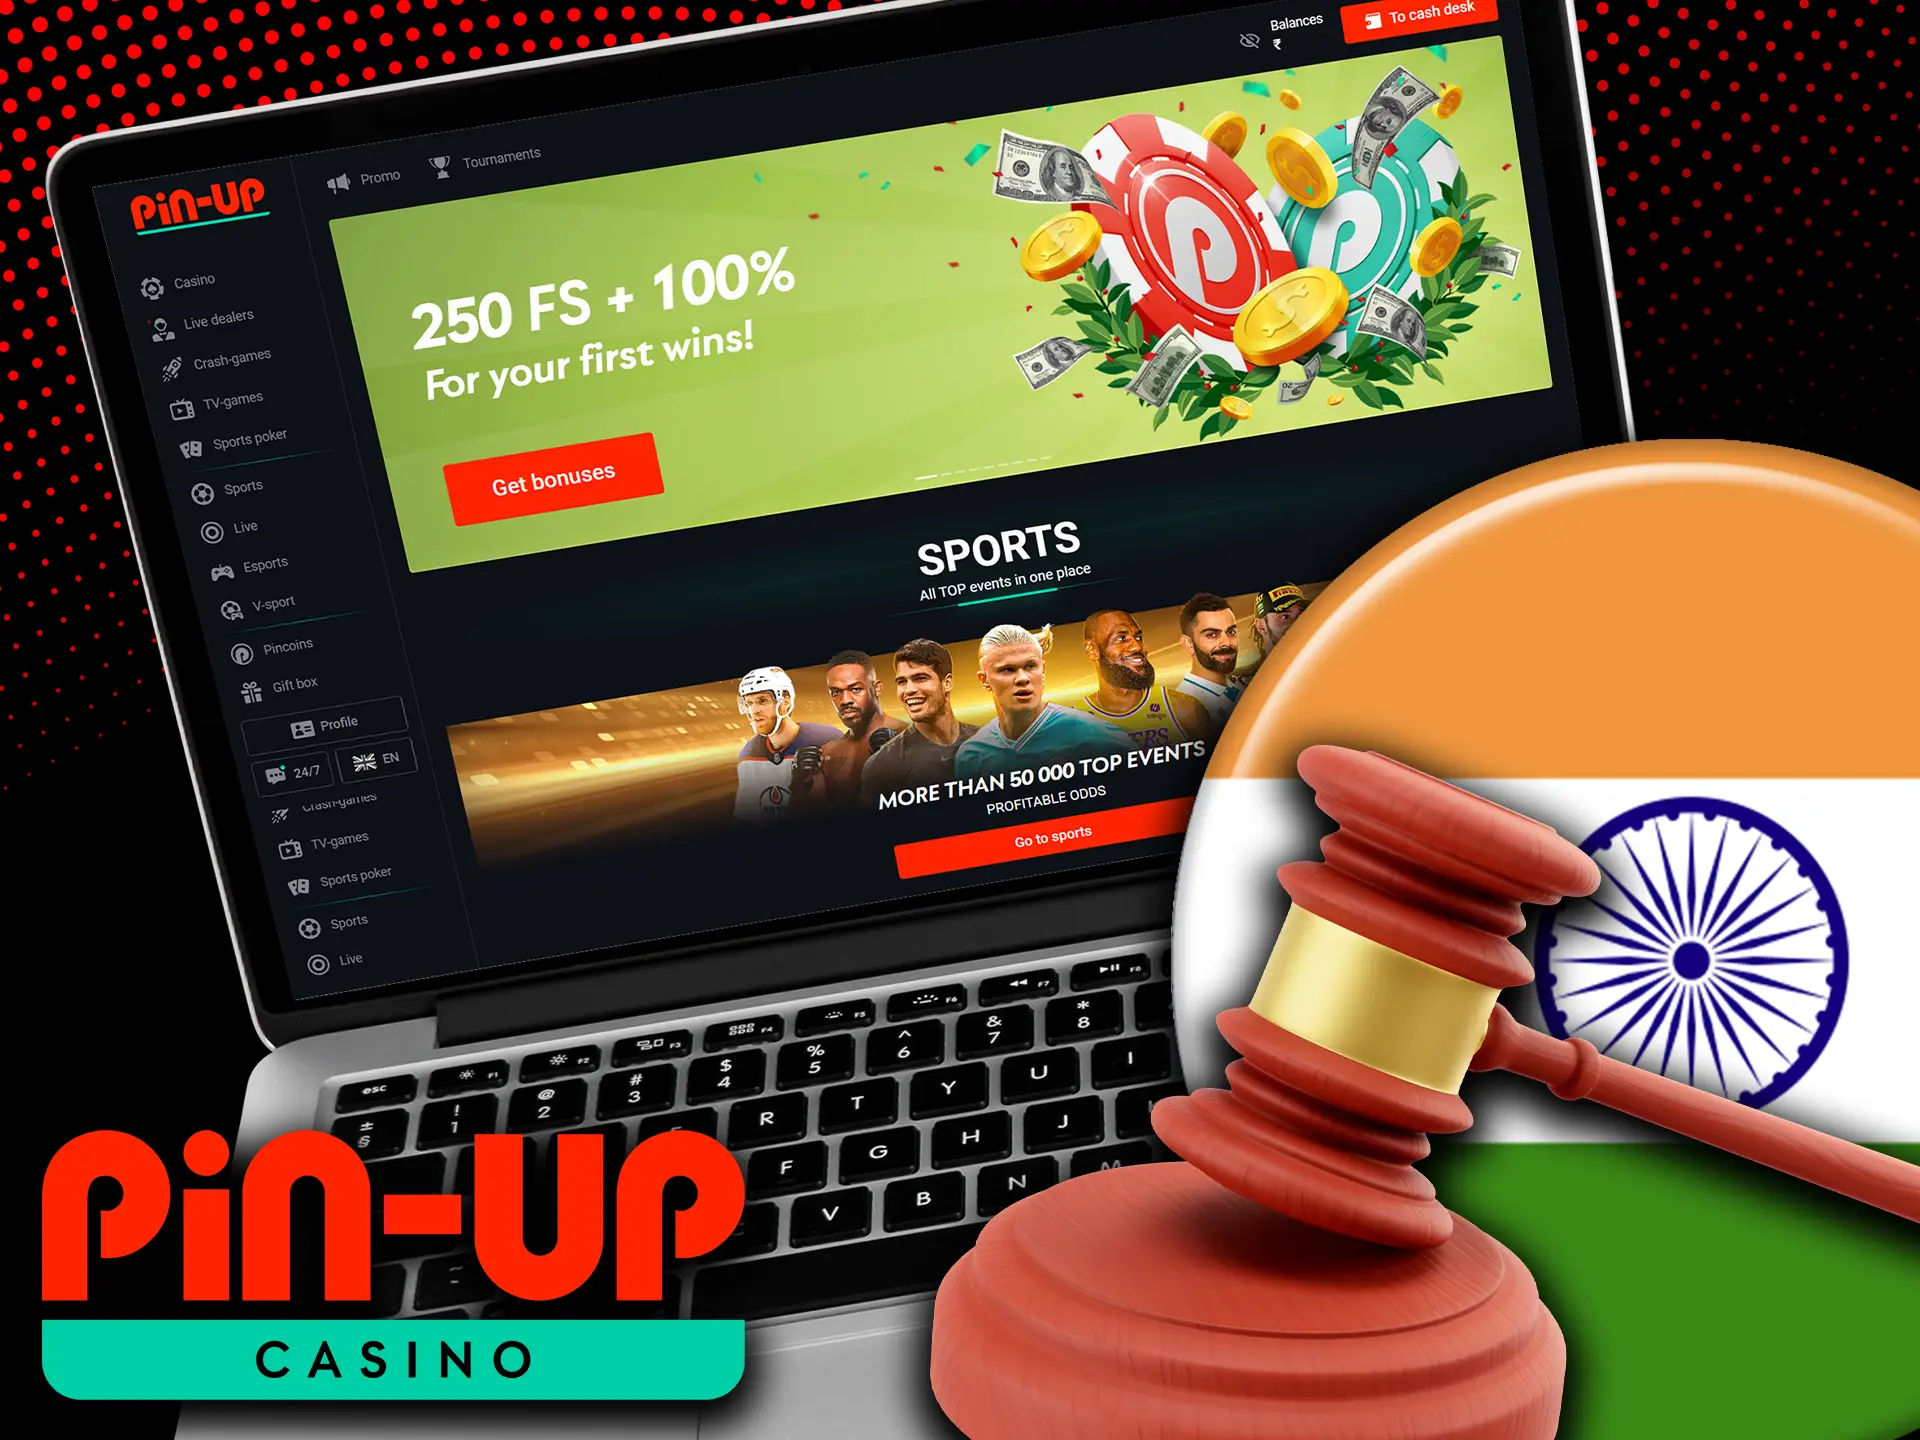 The Pin-Up site has the Curacao license for organizing casino games and providing betting on sports matches.